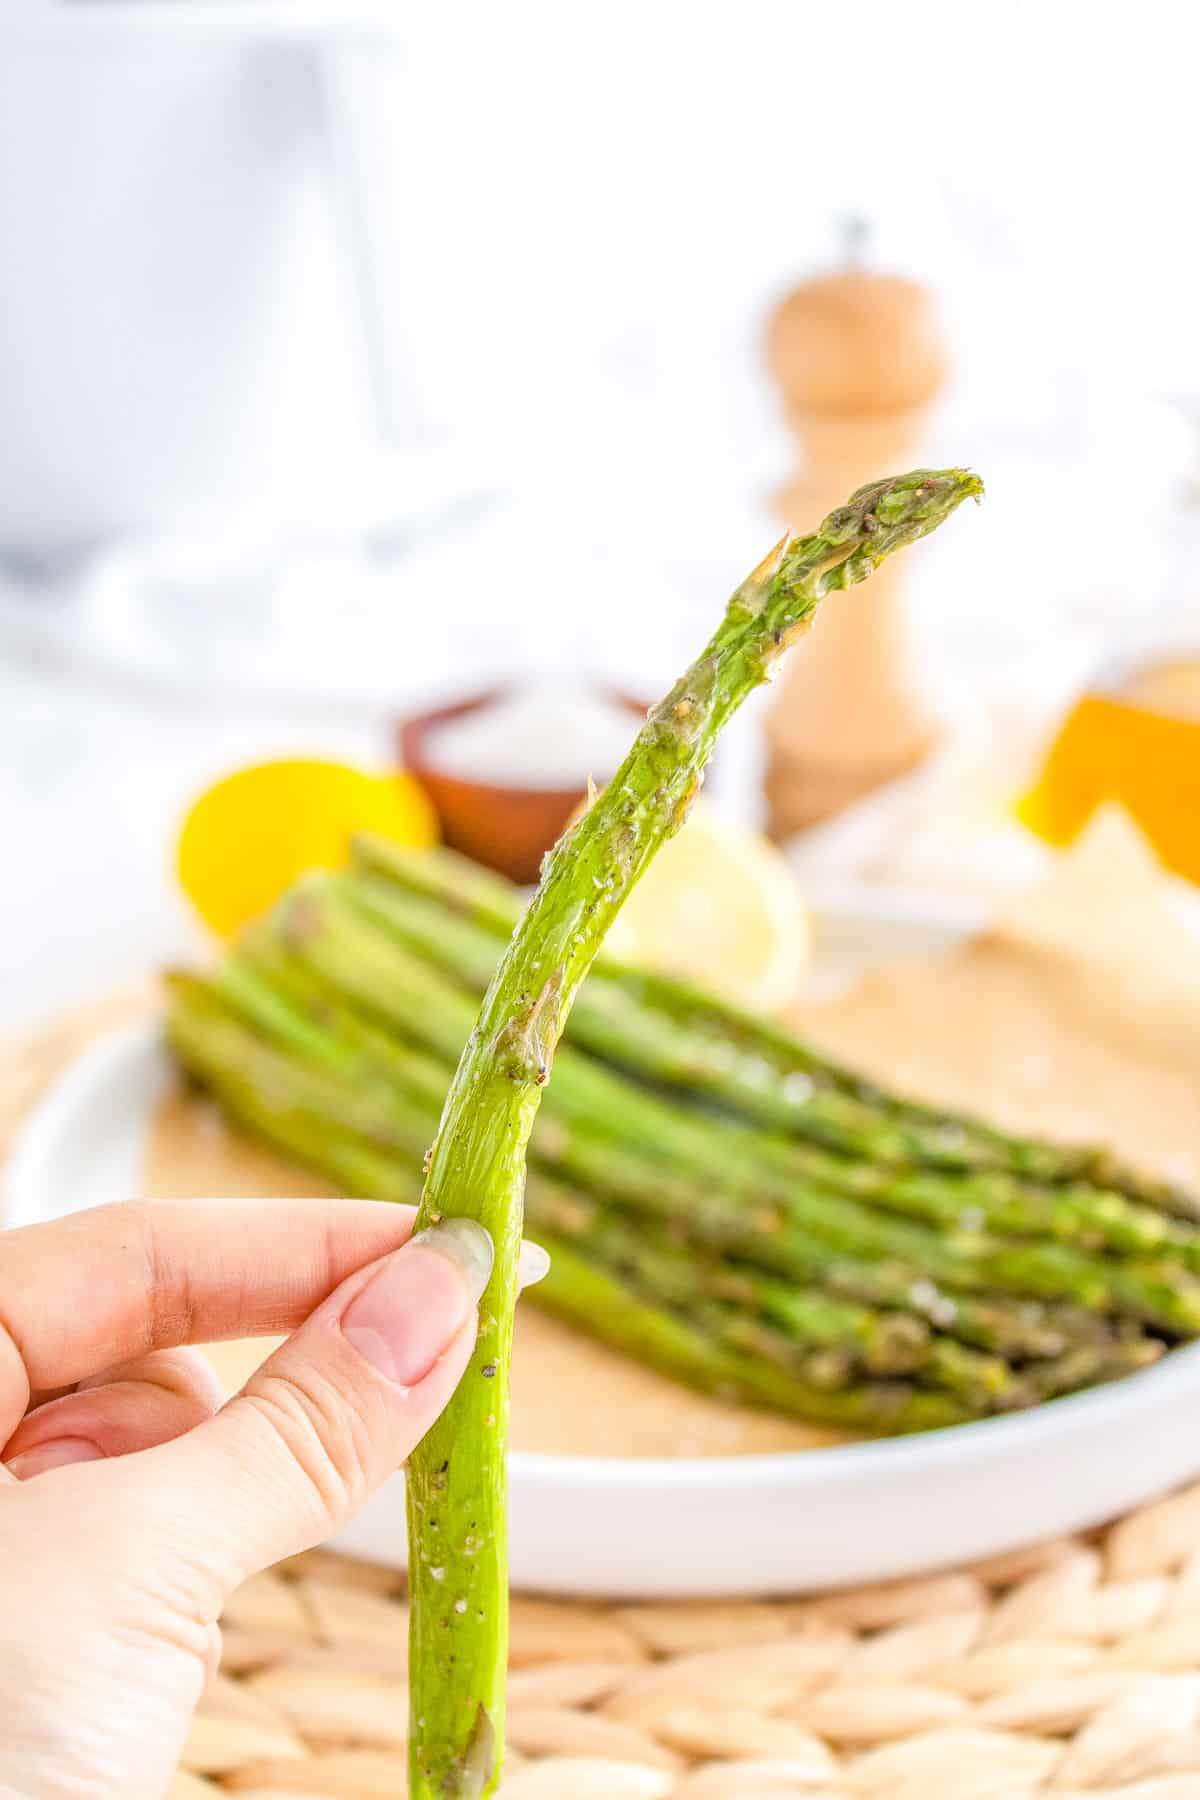 A hand picking up an air fried asparagus spear so you can how perfectly cooked it is.